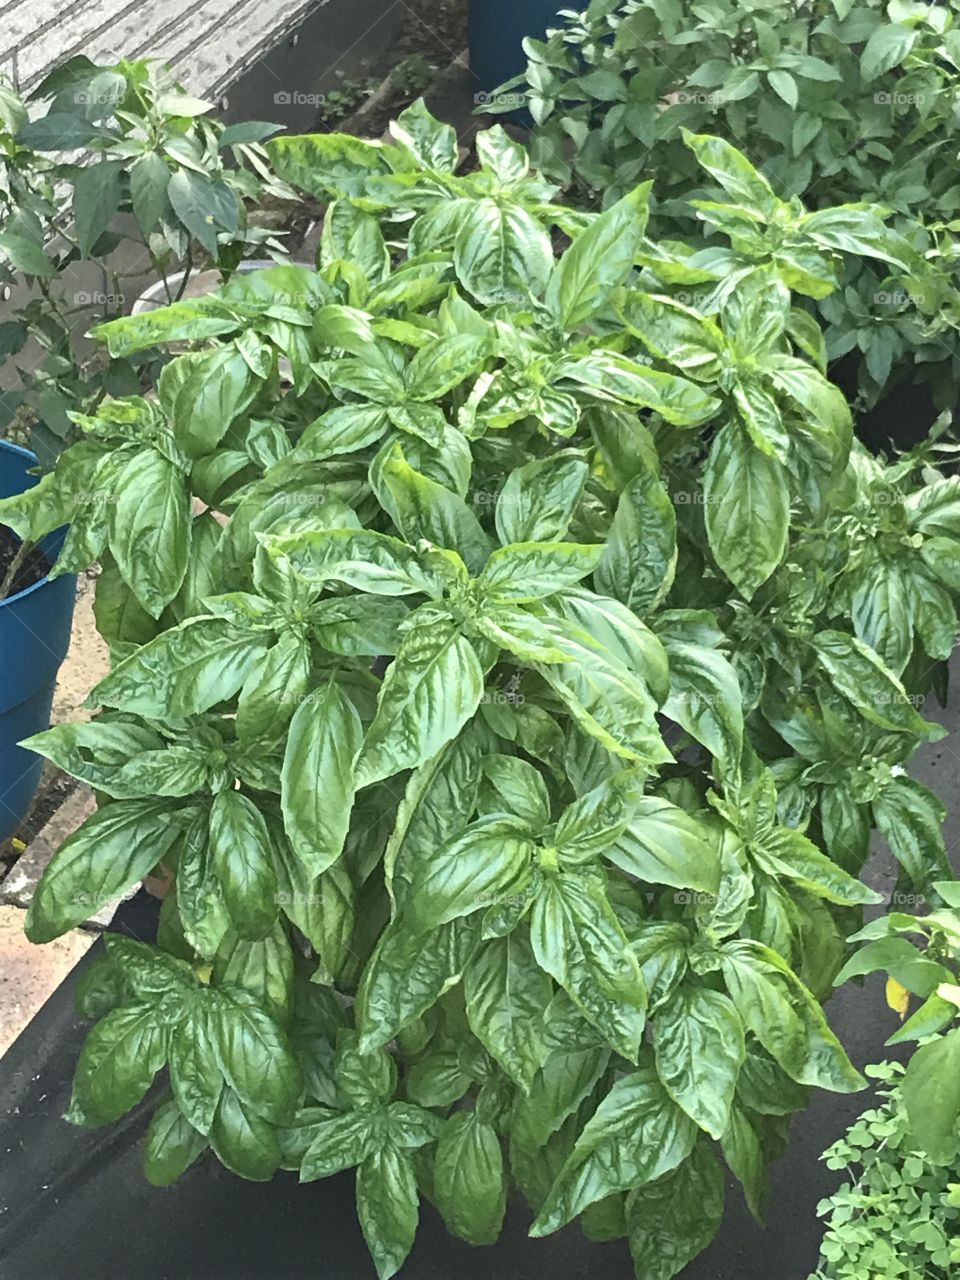 Basil is flourishing! Just walking by it the smell lingers on your skin.